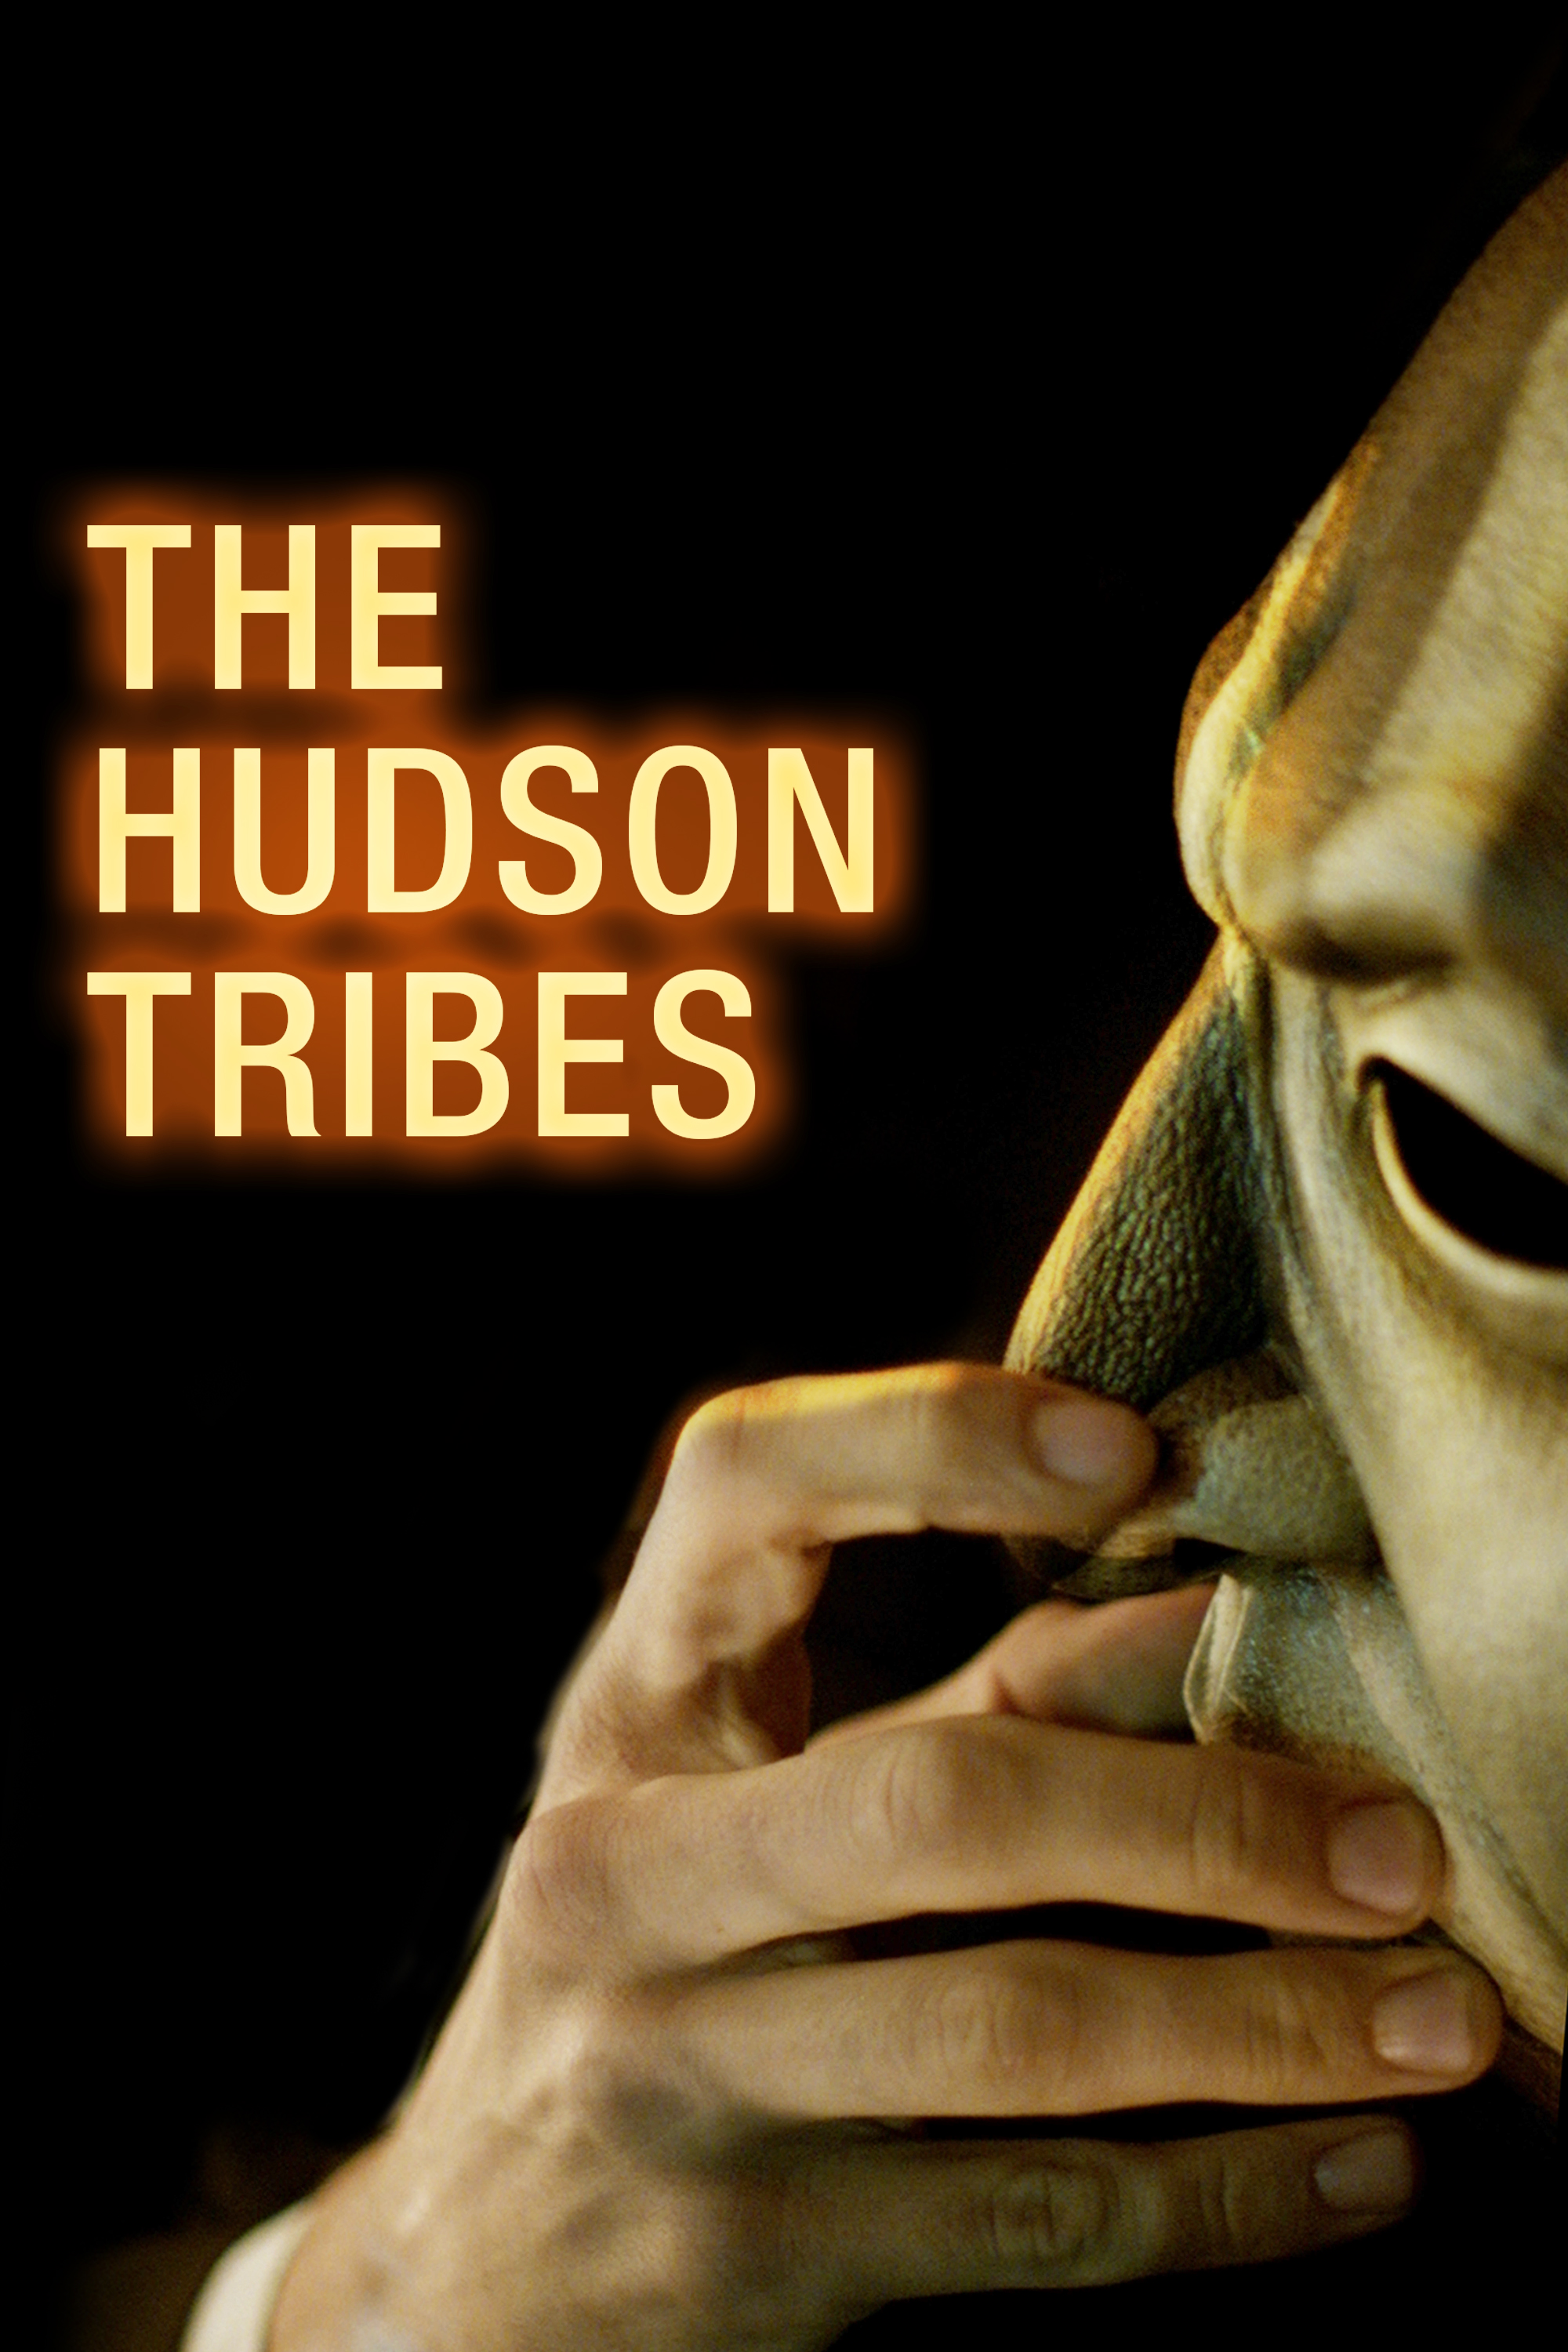 Pre-Order The Hudson Tribes Today!